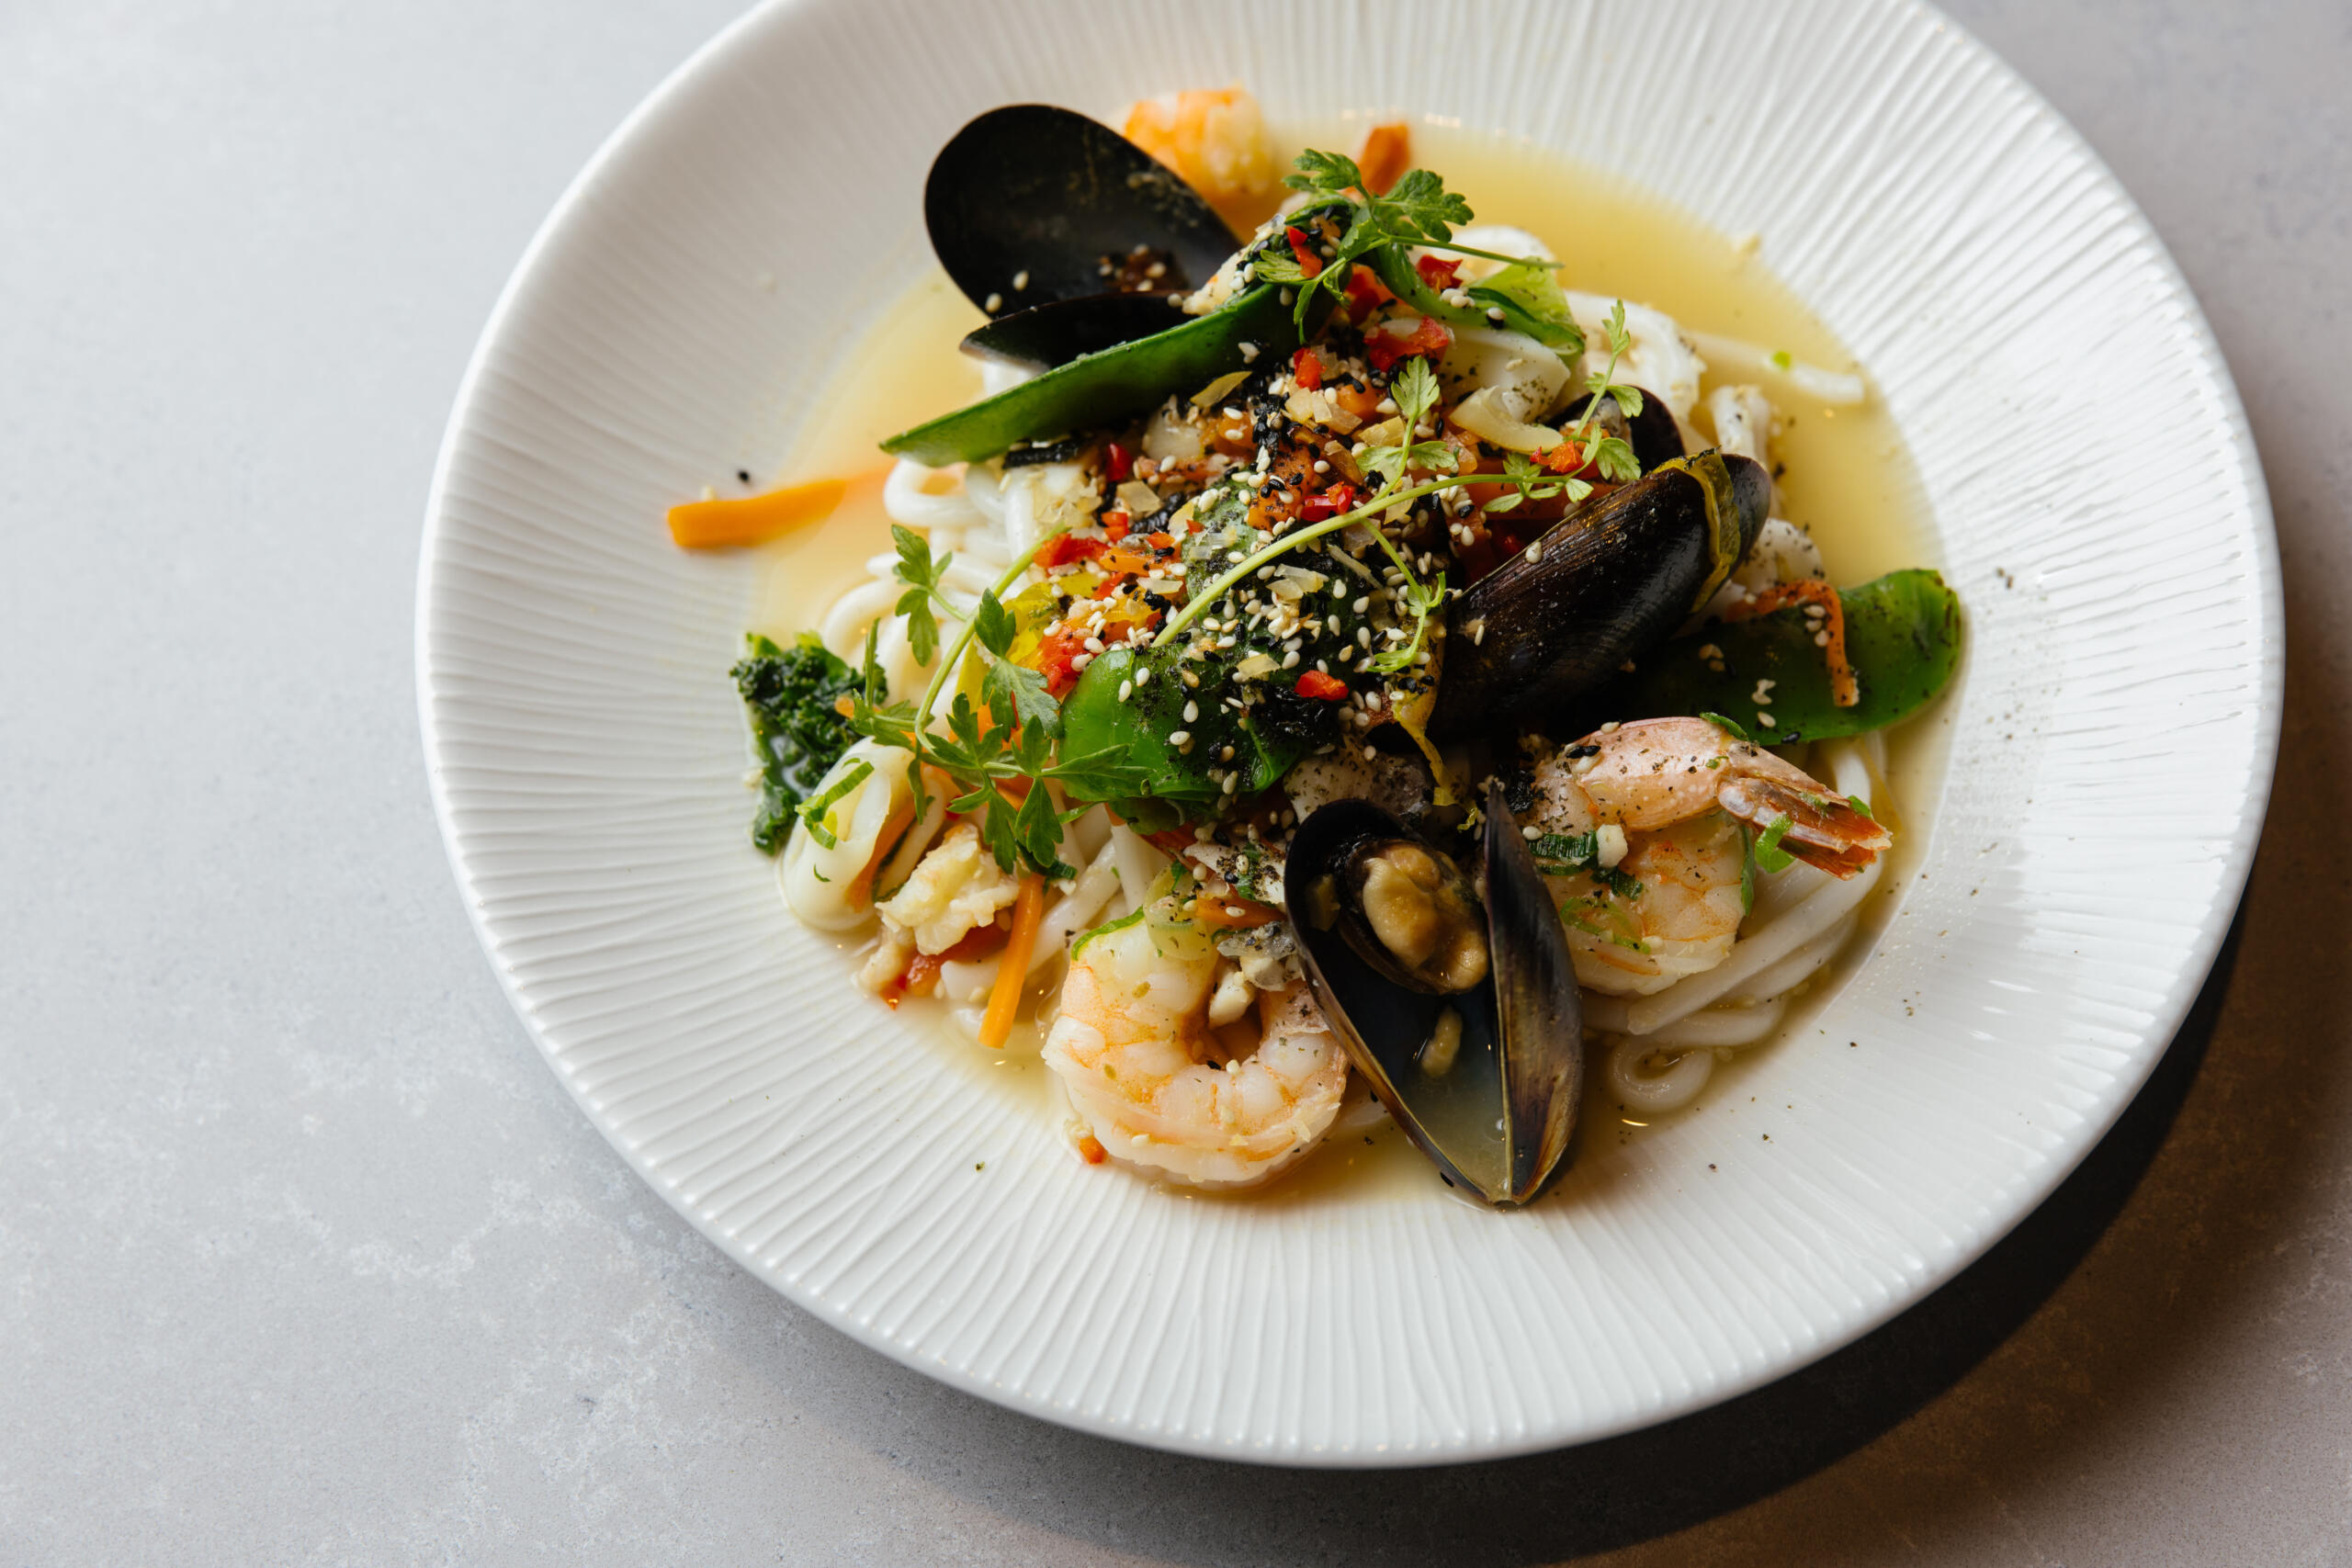 Main_Aromatic Local Seafood Pot with Udon Noodles 2_Plated Lunch Landscape